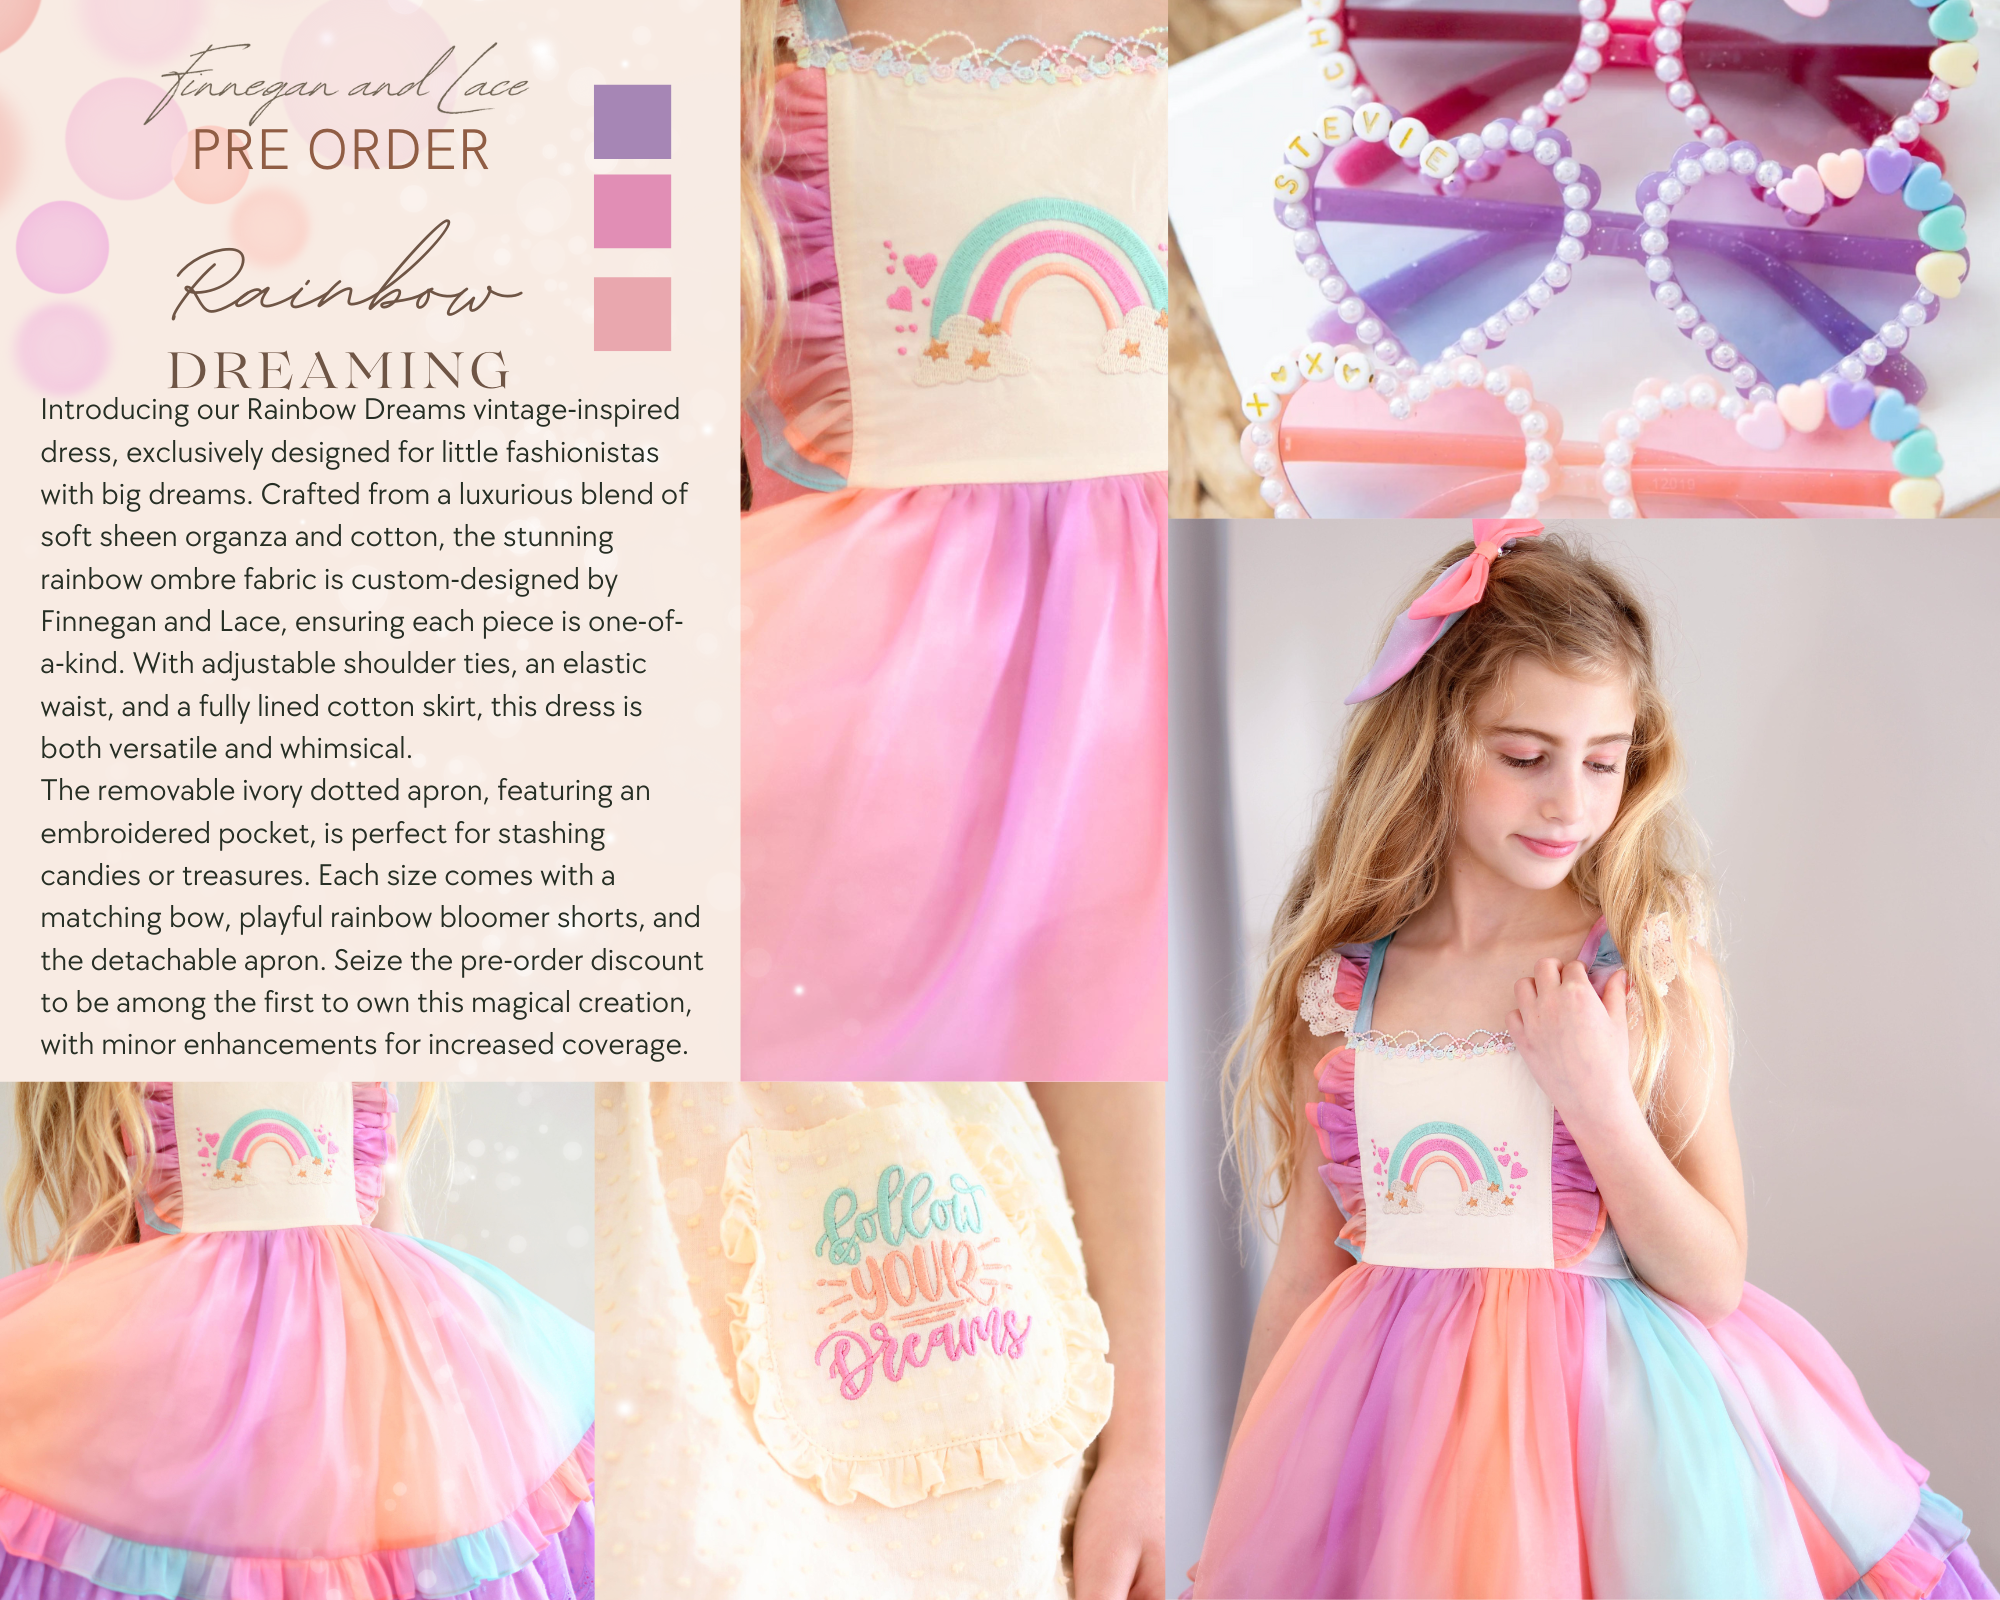 RAINBOW DREAMS by Finnegan and Lace Vintage inspired Dress Set (Includes Bow, Shorts and detach apron)